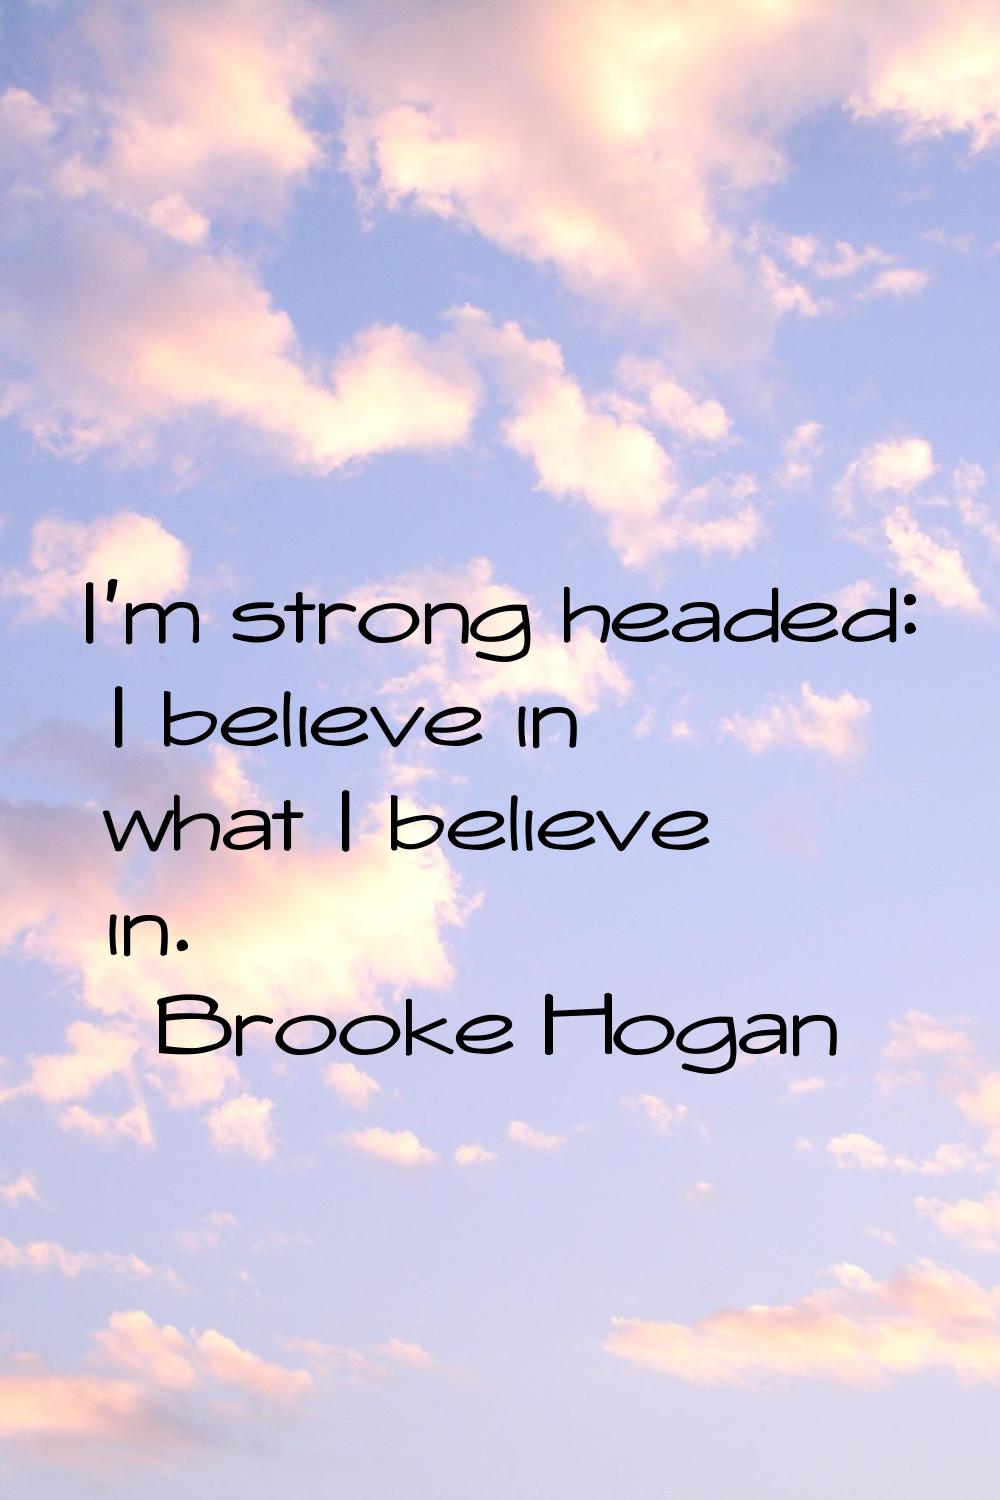 I'm strong headed: I believe in what I believe in.